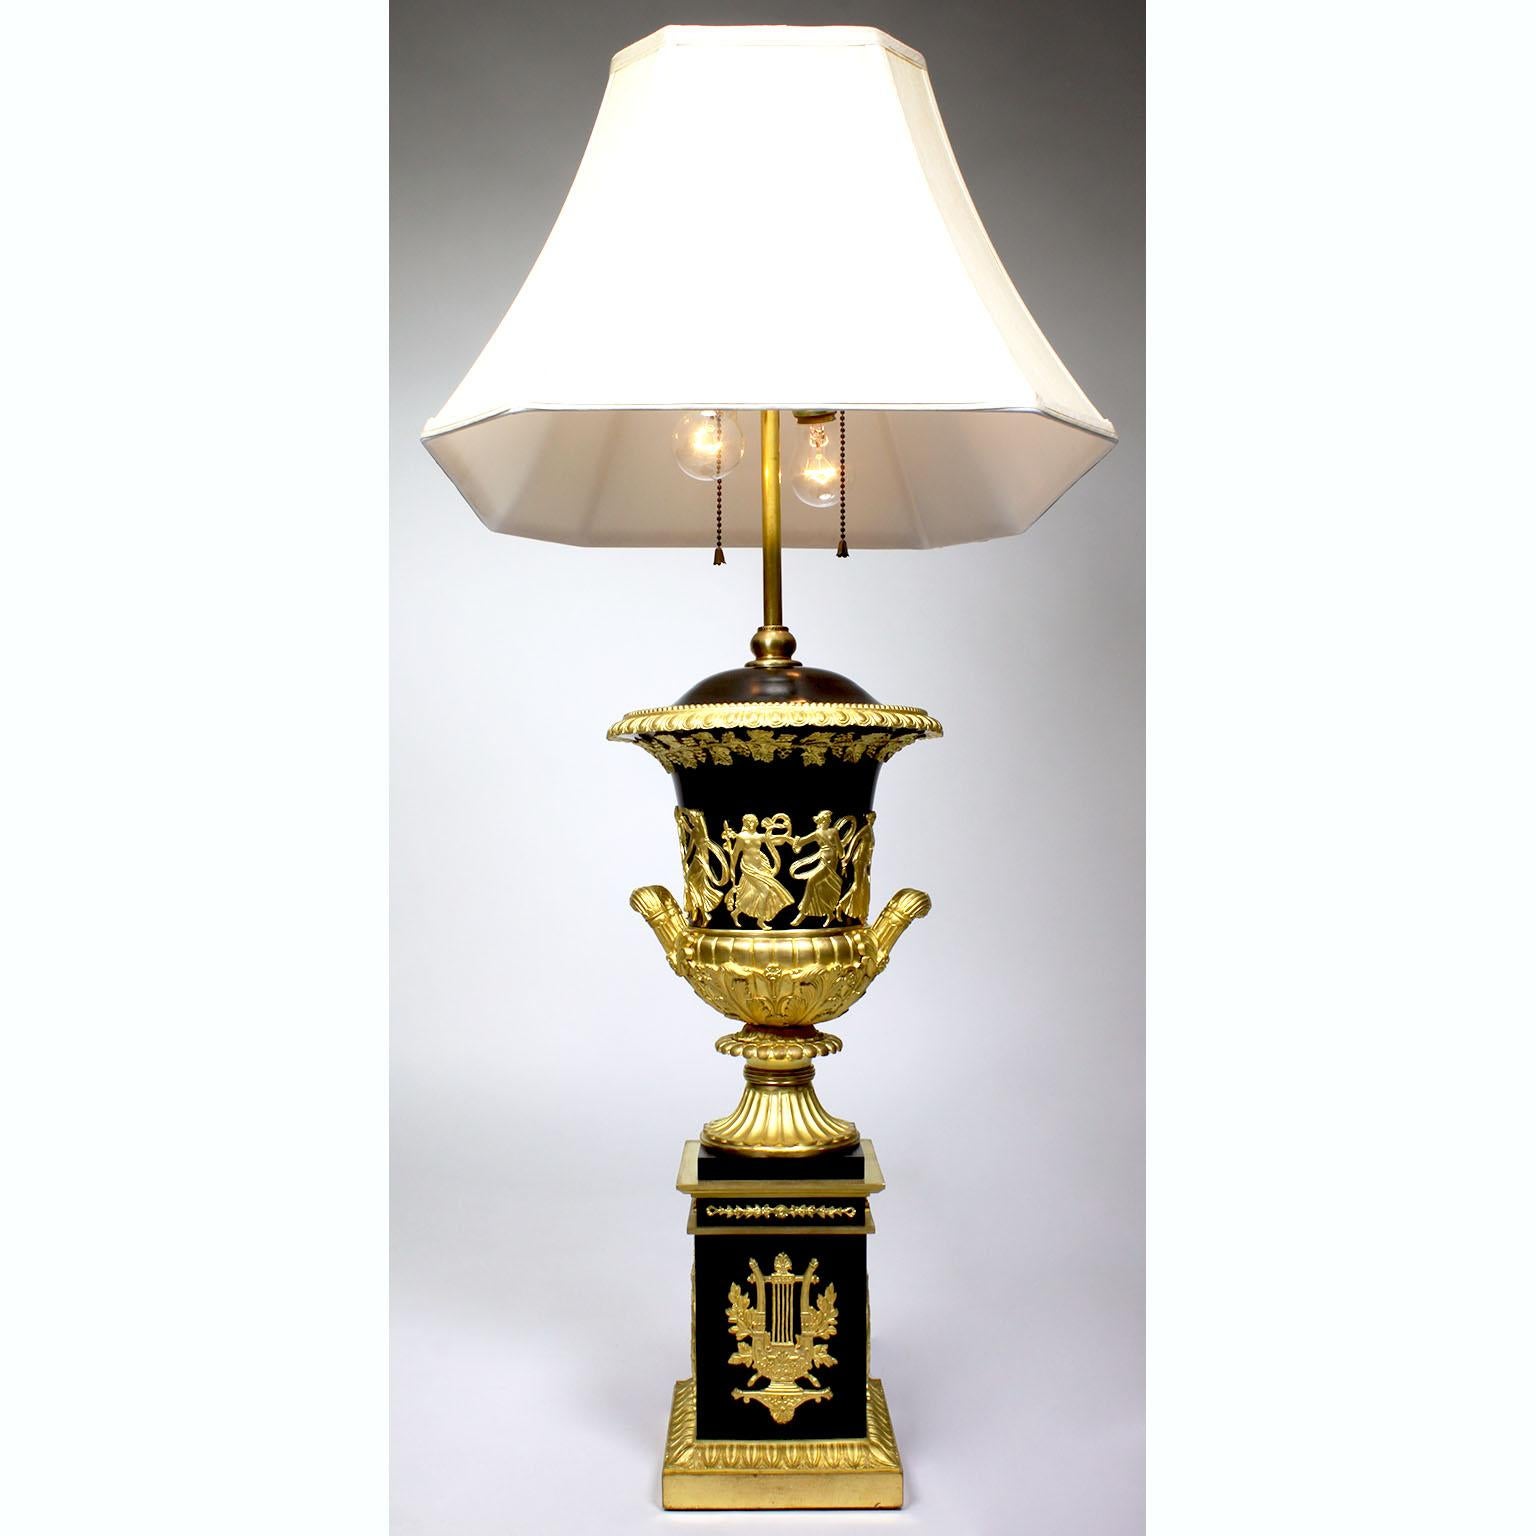 Pair French 19th Century Napoleon III Empire Style Gilt-Bronze Urn Table Lamps For Sale 2